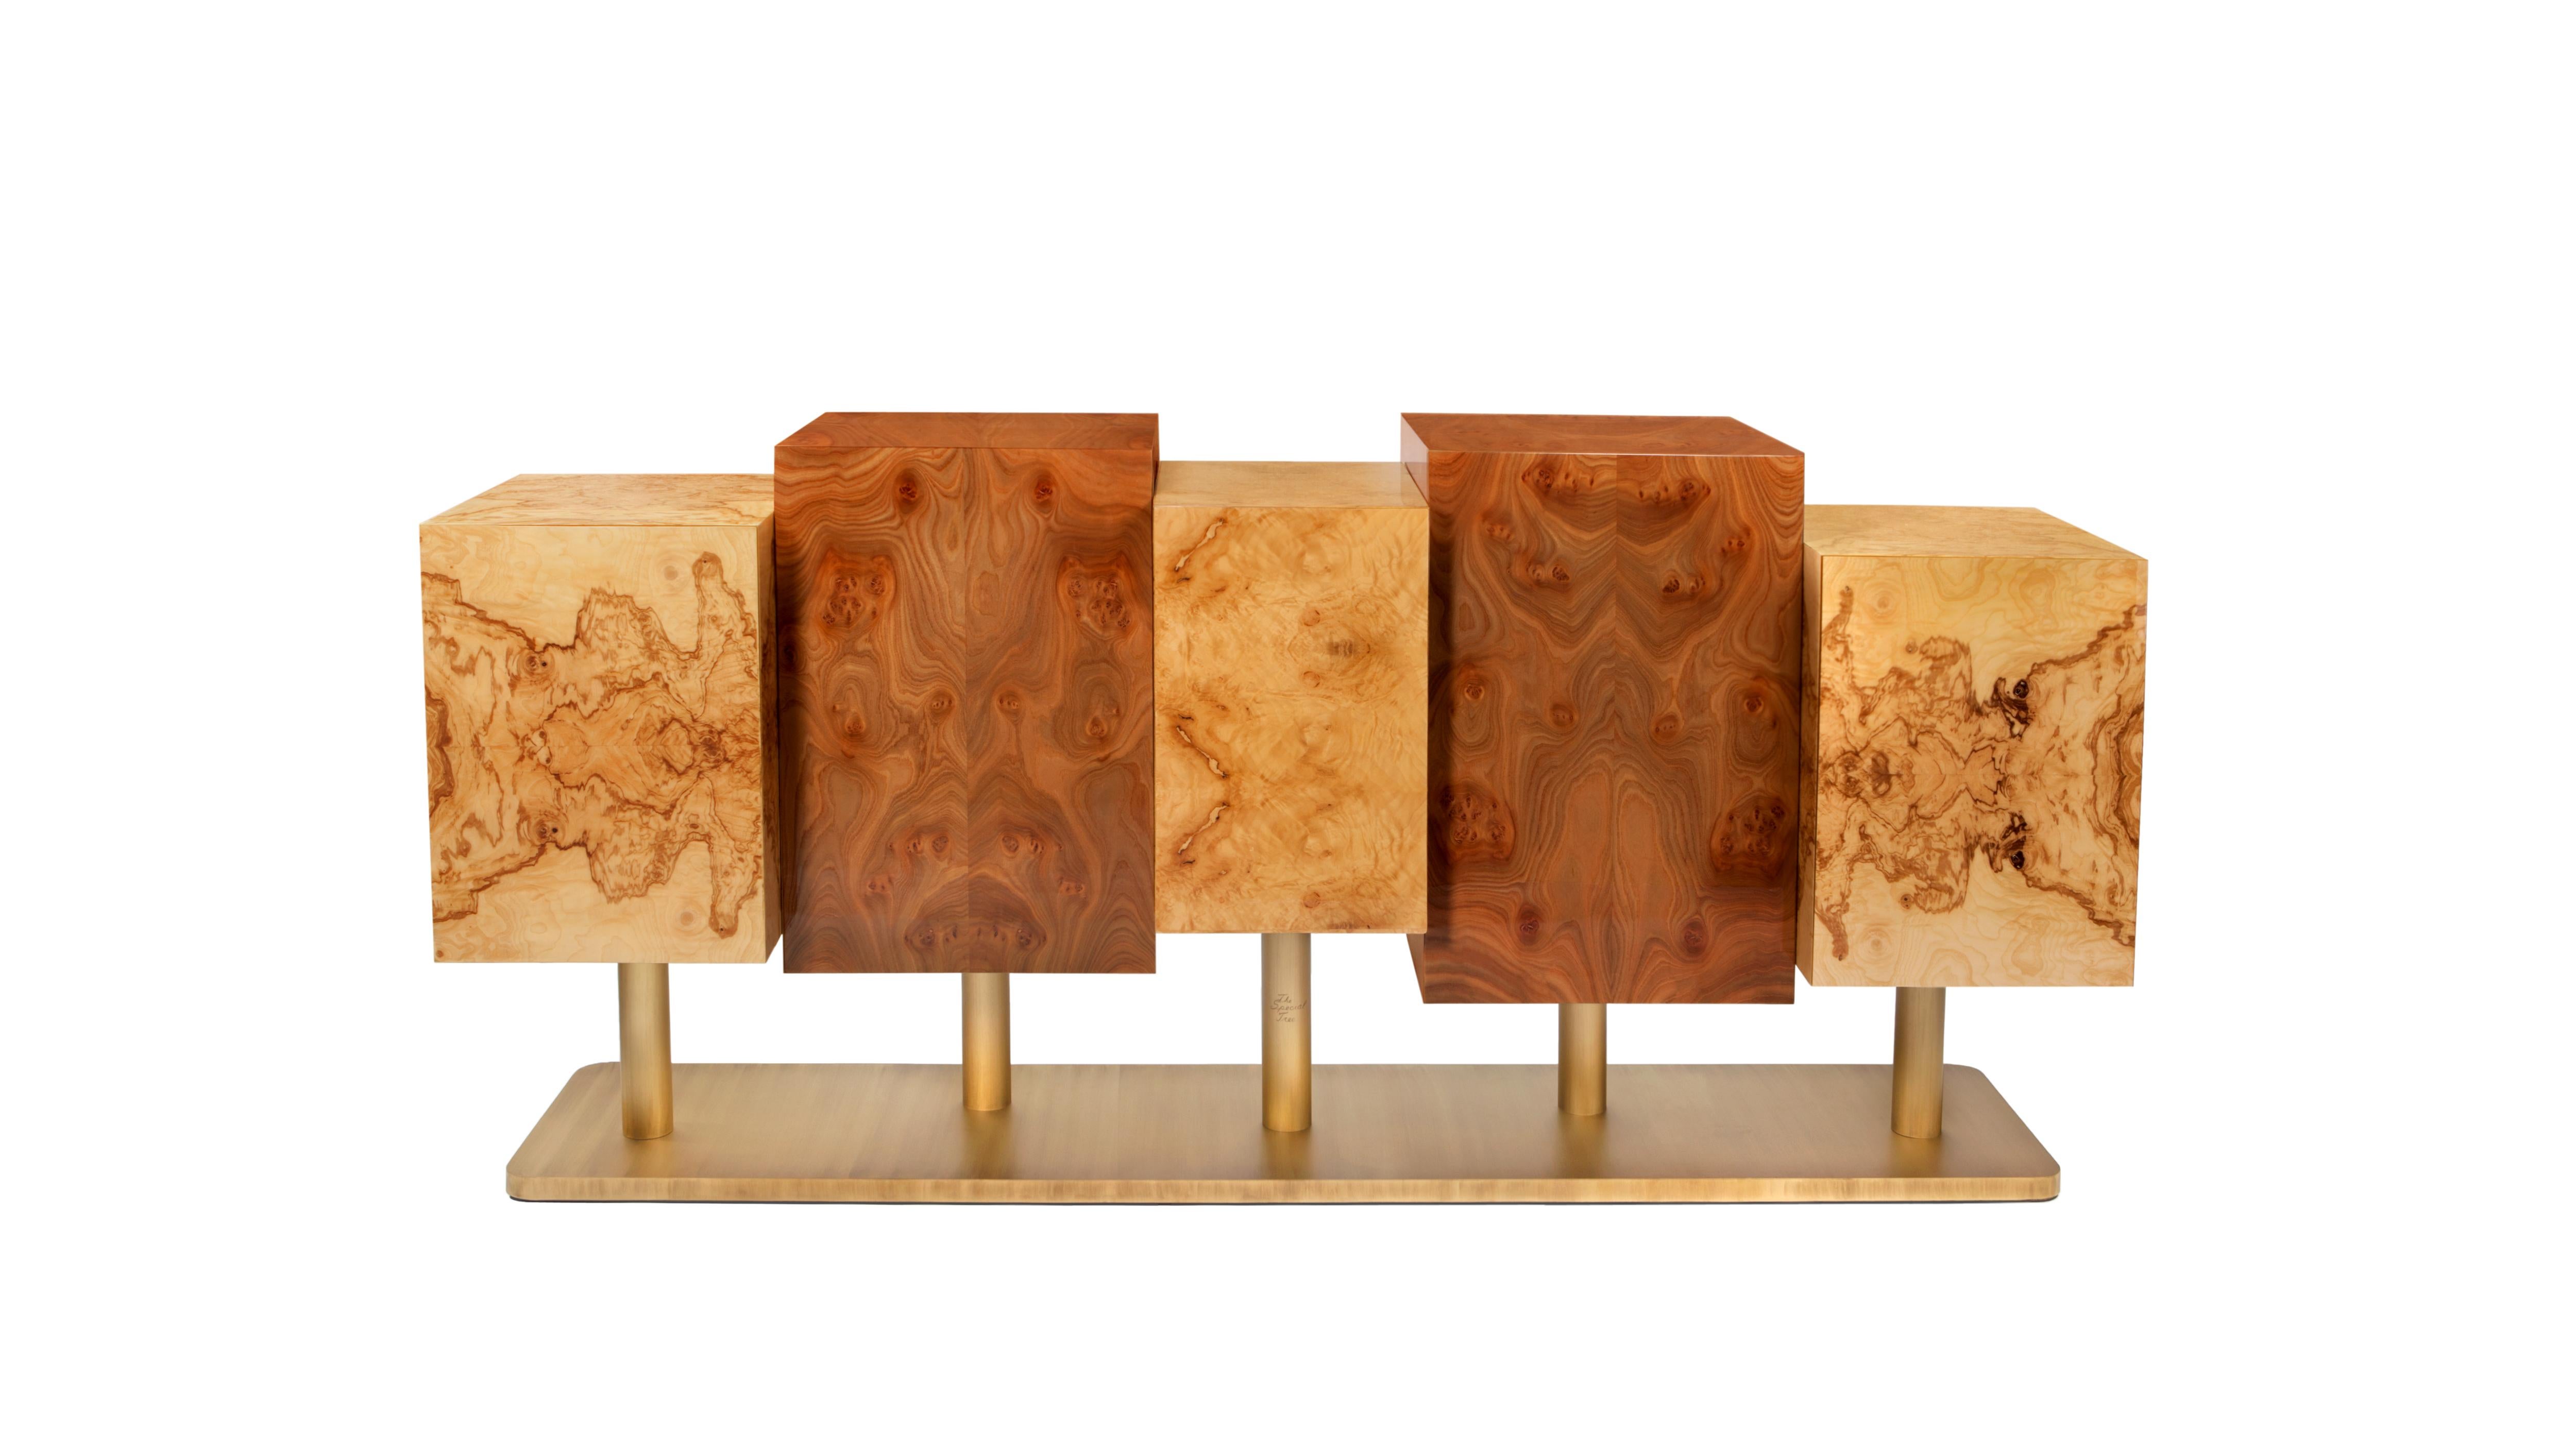 The Special Tree Sideboard by InsidherLand
Dimensions: D 53 x W 200 x H 95 cm.
Materials: 
Wooden structure: exotic veneers (myrtle root, elm root, and olive ash burl) and interior in
satinwood veneer. Shelves: glass. Base, tubes, and shelf